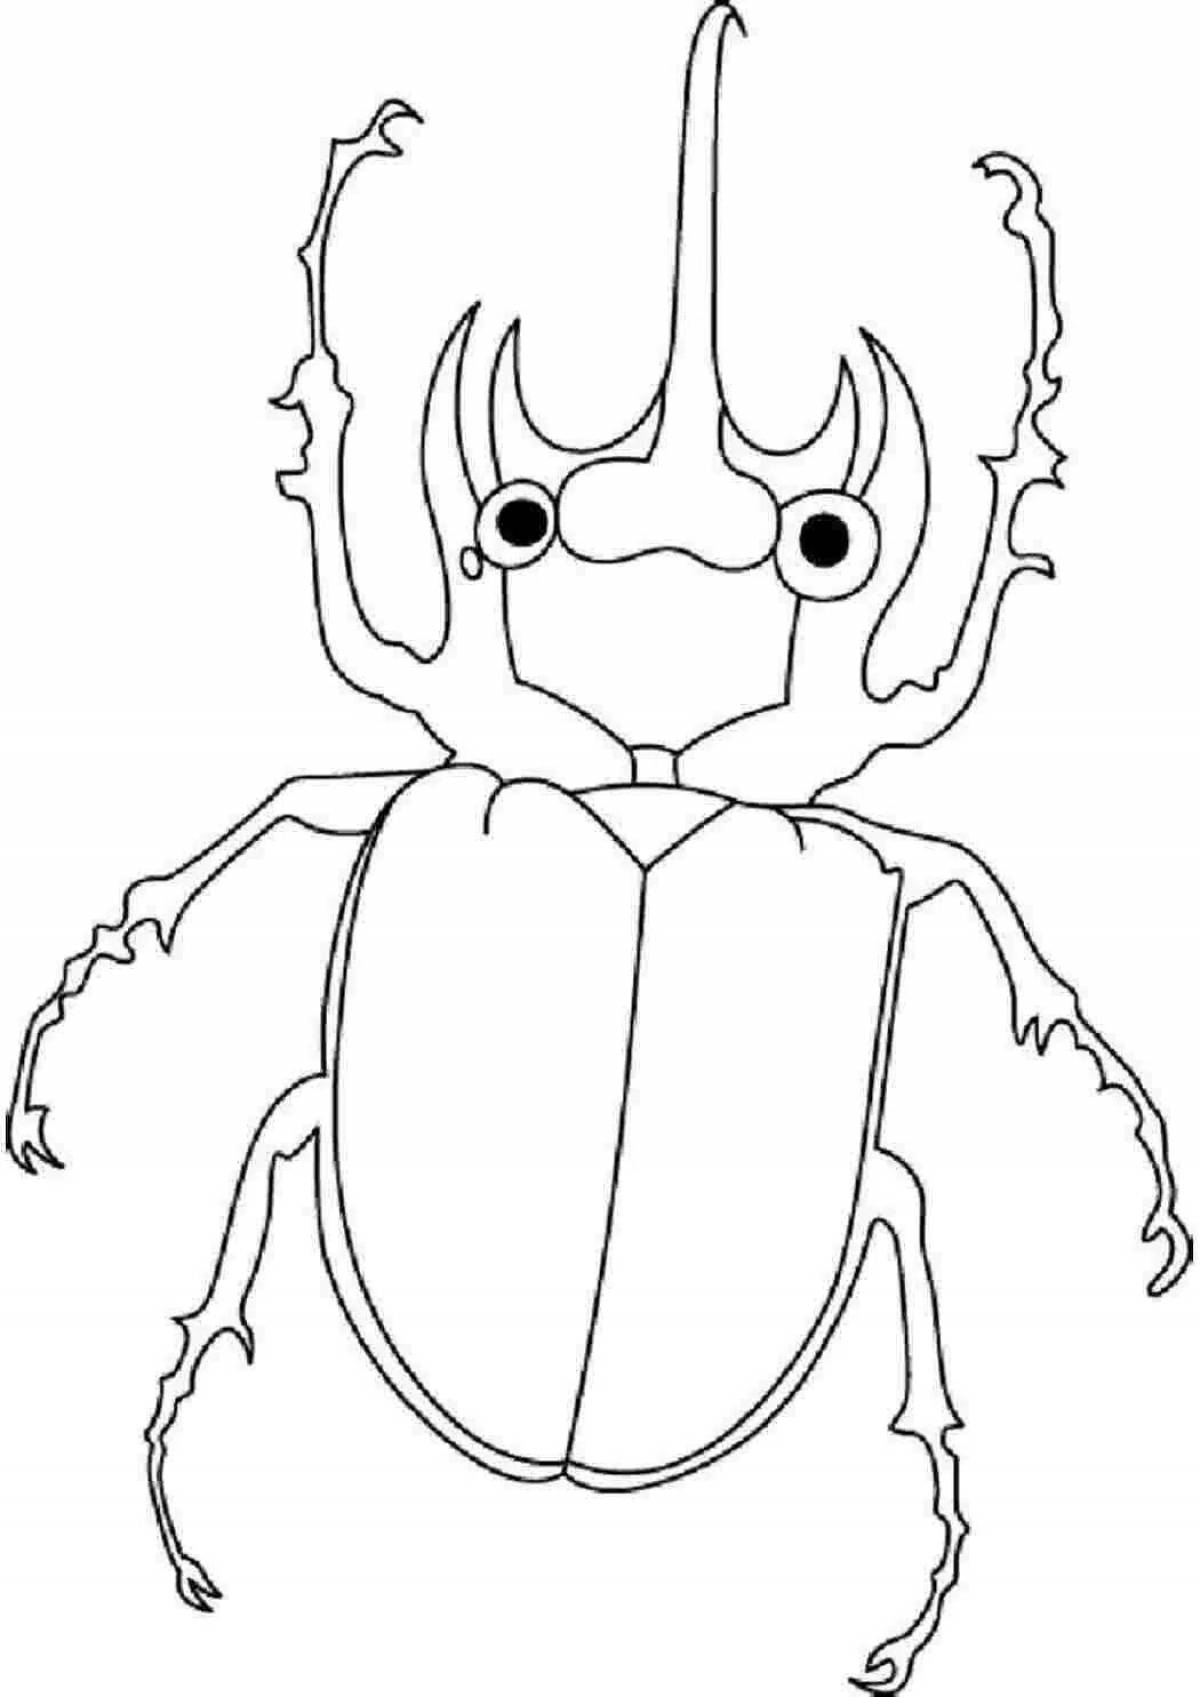 Gorgeous beetle coloring book